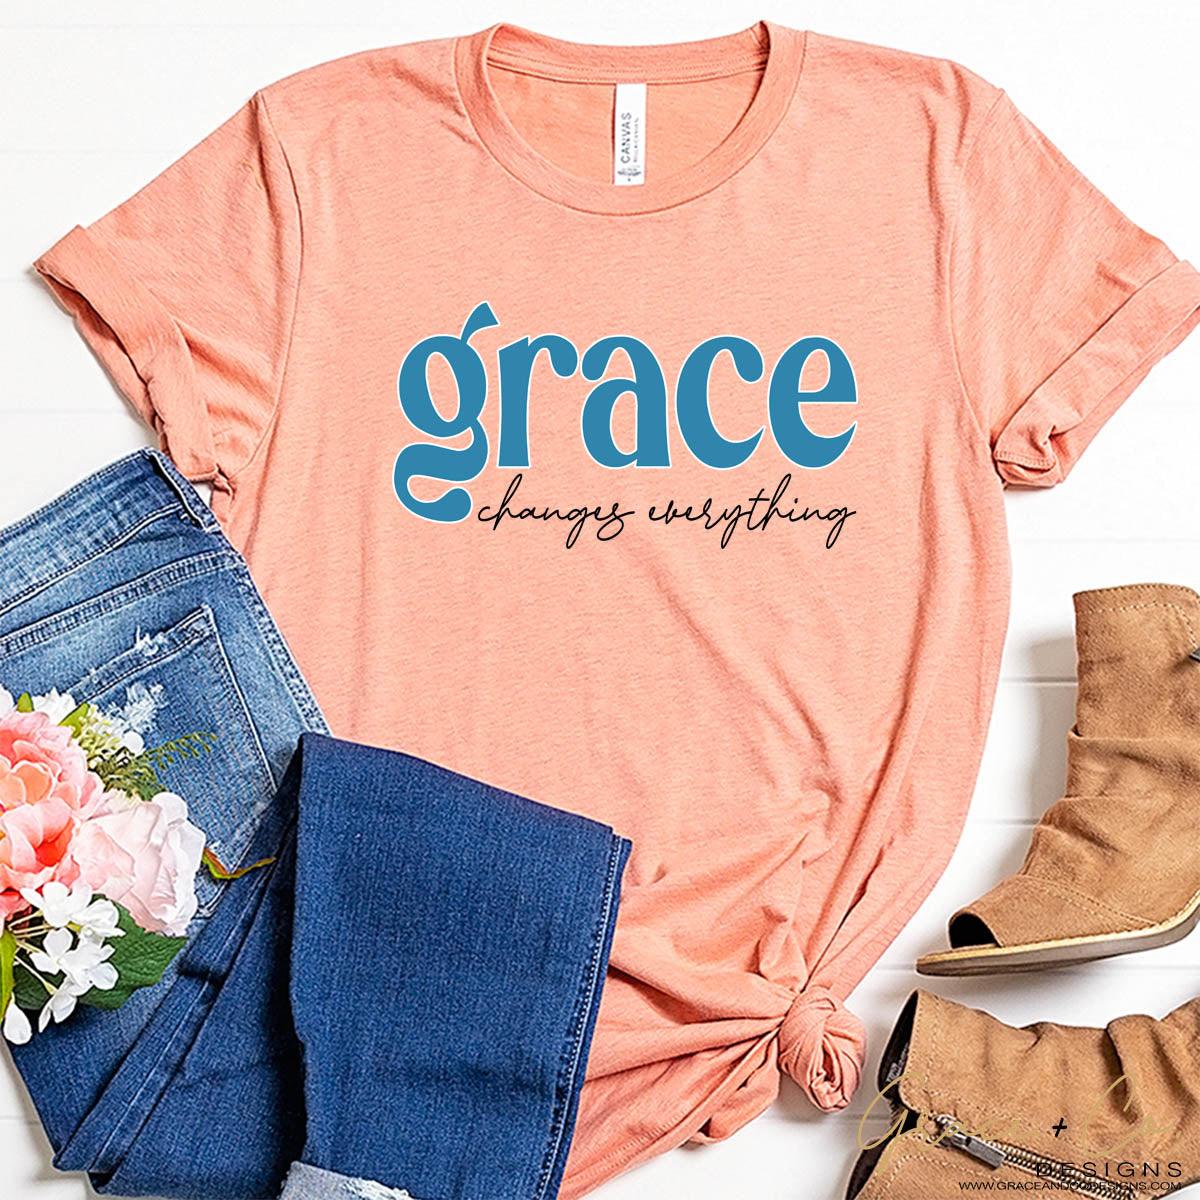 Grace Changes Everything - Grace & Co. Designs 